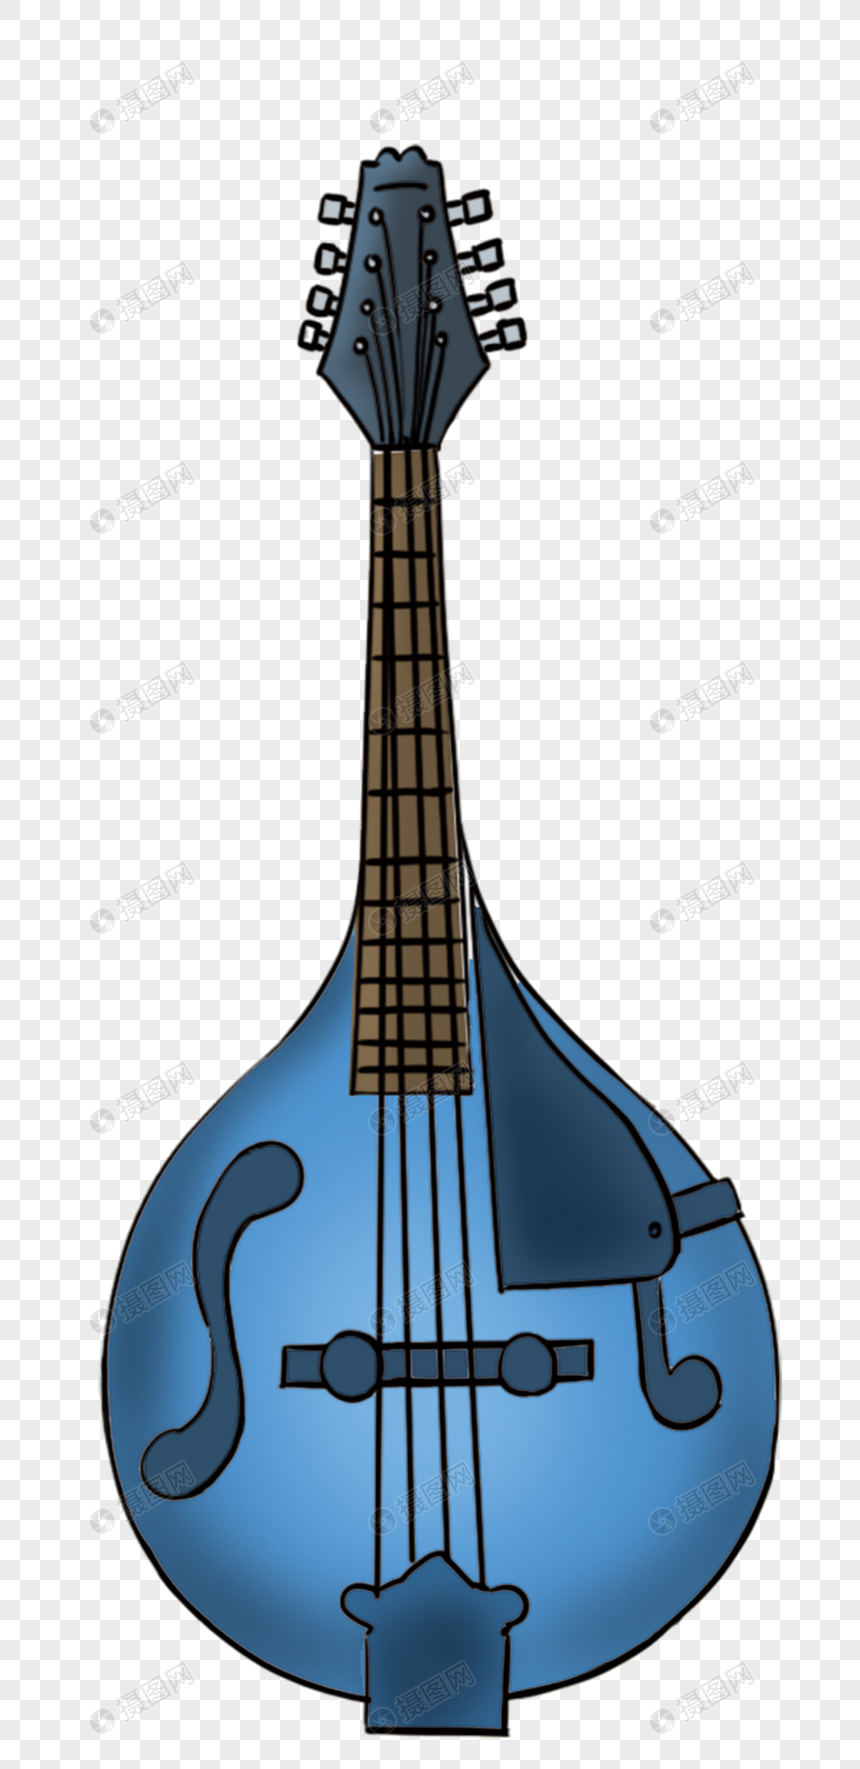 Original Hand Drawn Musical Instrument Music Festival Vector Ele, Hand Drawn,  Musical Instrument, Music Festival PNG Transparent Background AI images  free download_1369 × 1024 px - Lovepik